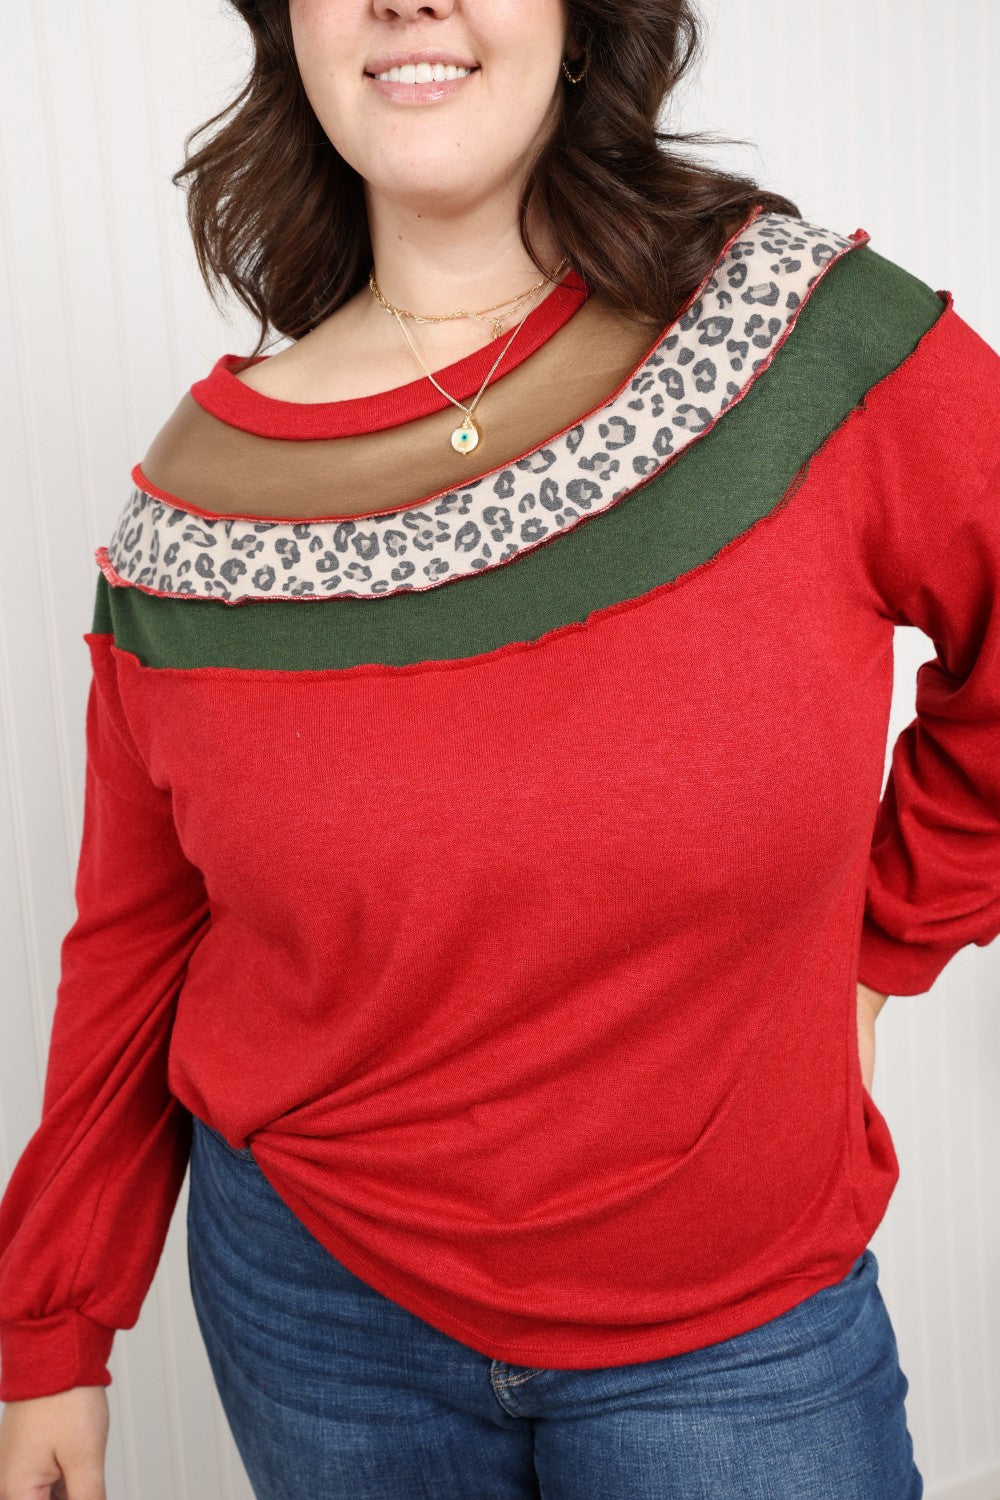 Haptics Full Size Leopard Contrast Exposed Seam Top in Red